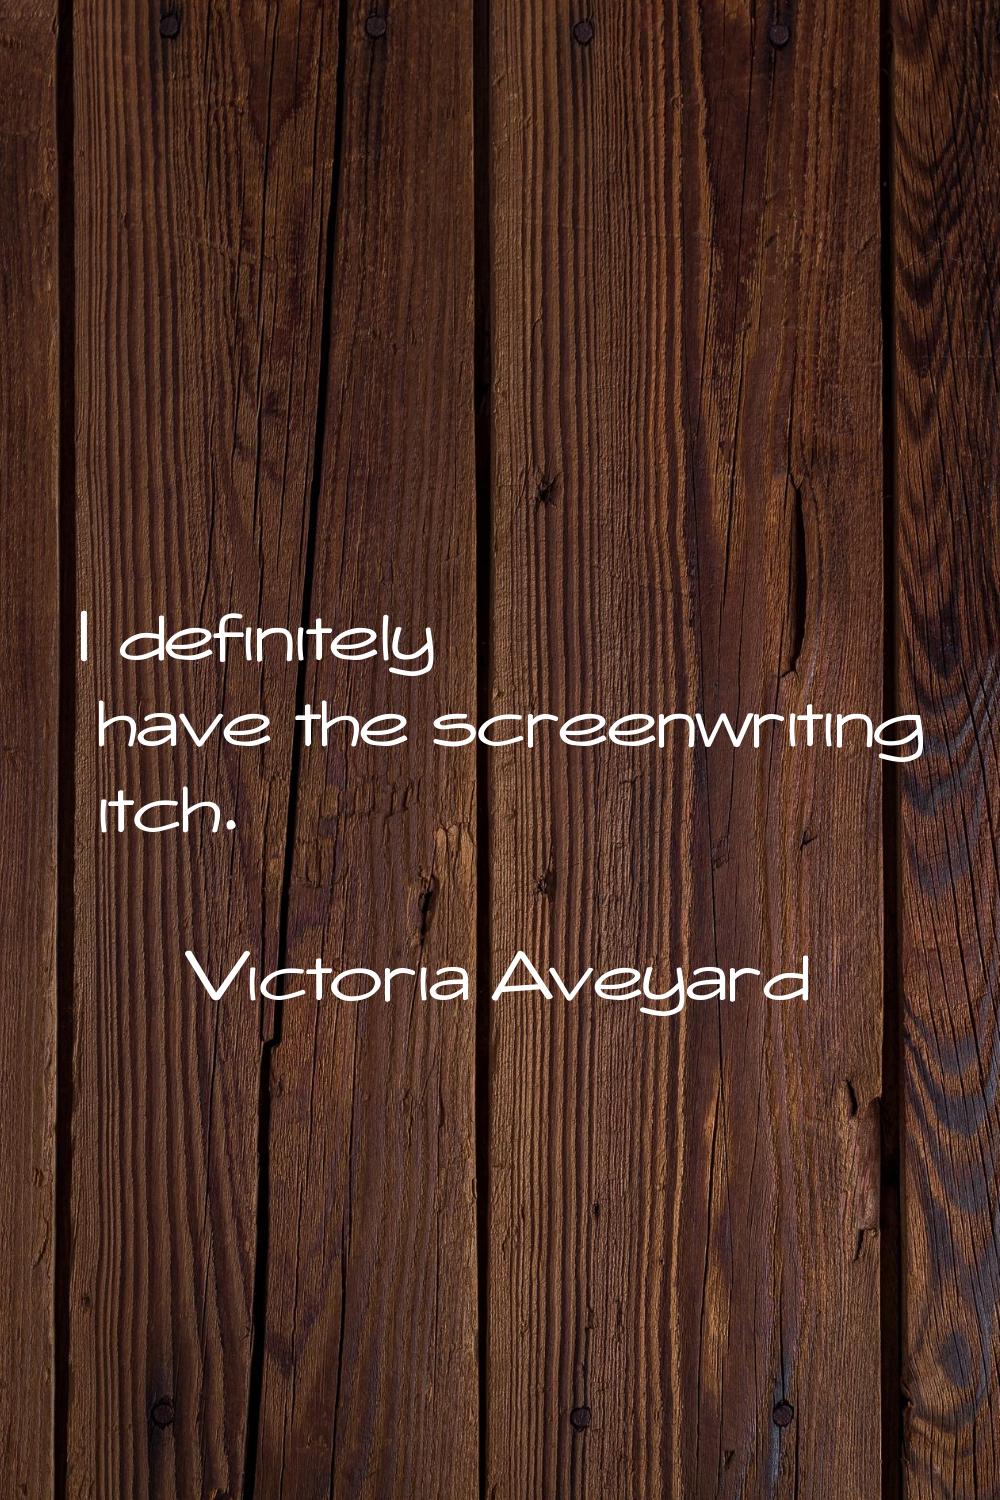 I definitely have the screenwriting itch.